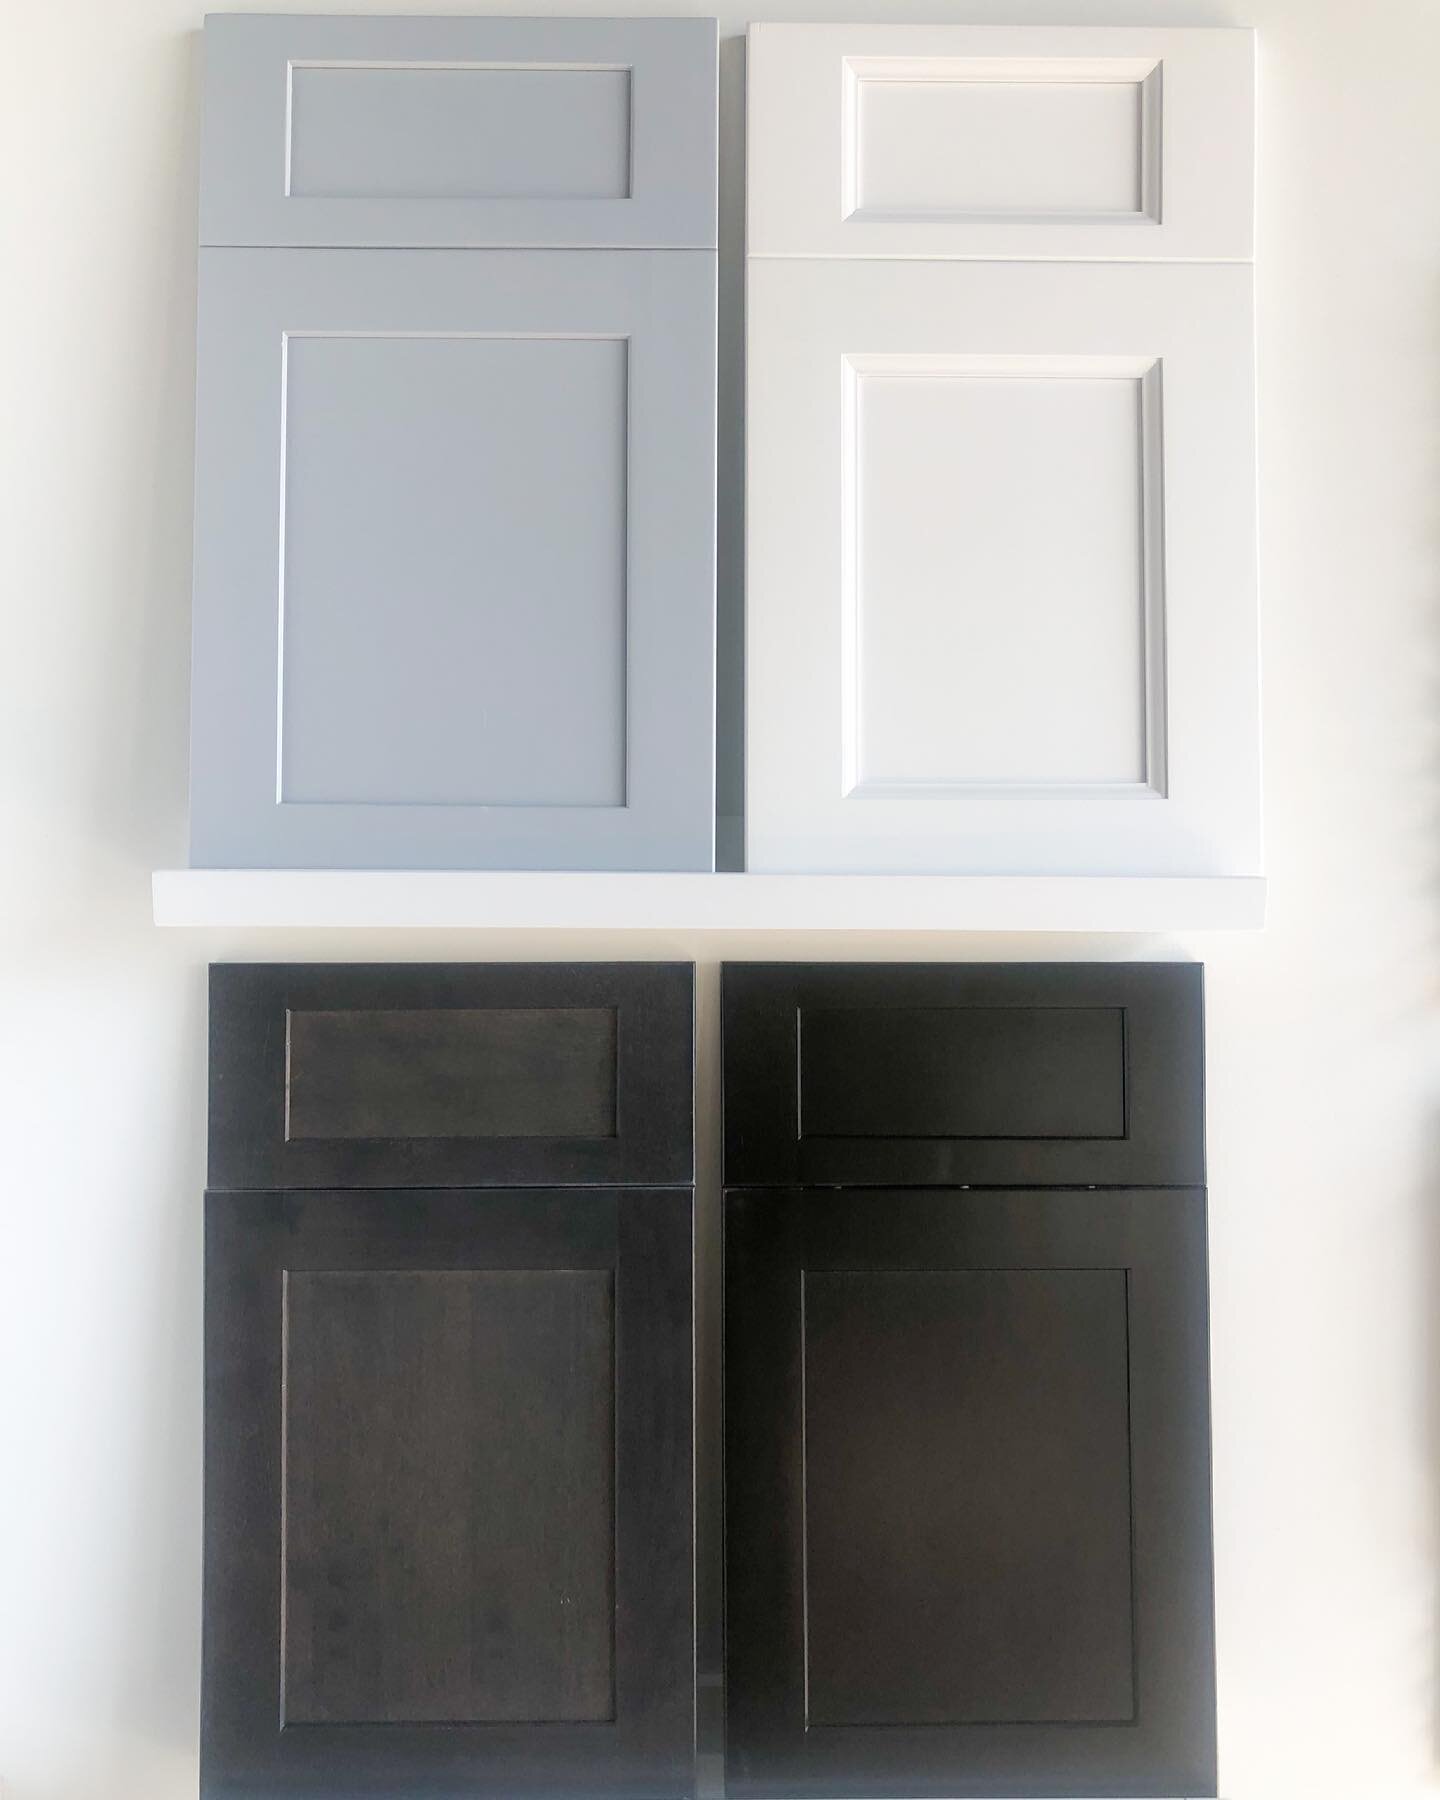 Did you know you can use Fabuwood cabinetry for more than just your kitchen? You can create a custom vanity or desk too! Featured door styles: Allure Galaxy Cobblestone | Allure Galaxy Espresso | Allure Nexus Frost | Allure Galaxy Nickel